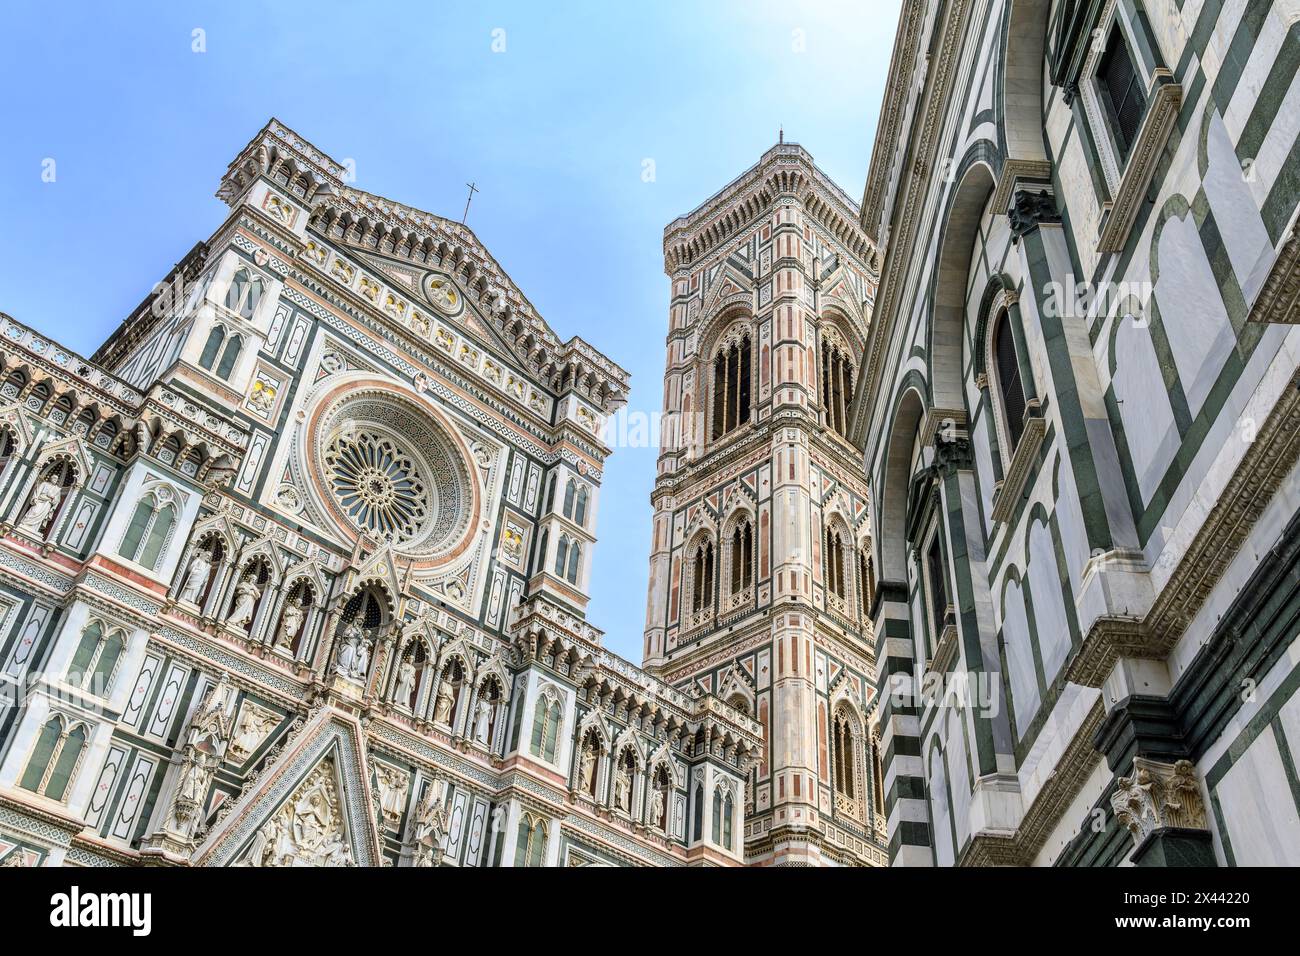 The spectacular Cathedral of Santa Maria del Fiore is probably the most iconic building in the centre of Florence. Truly breathtaking! Stock Photo